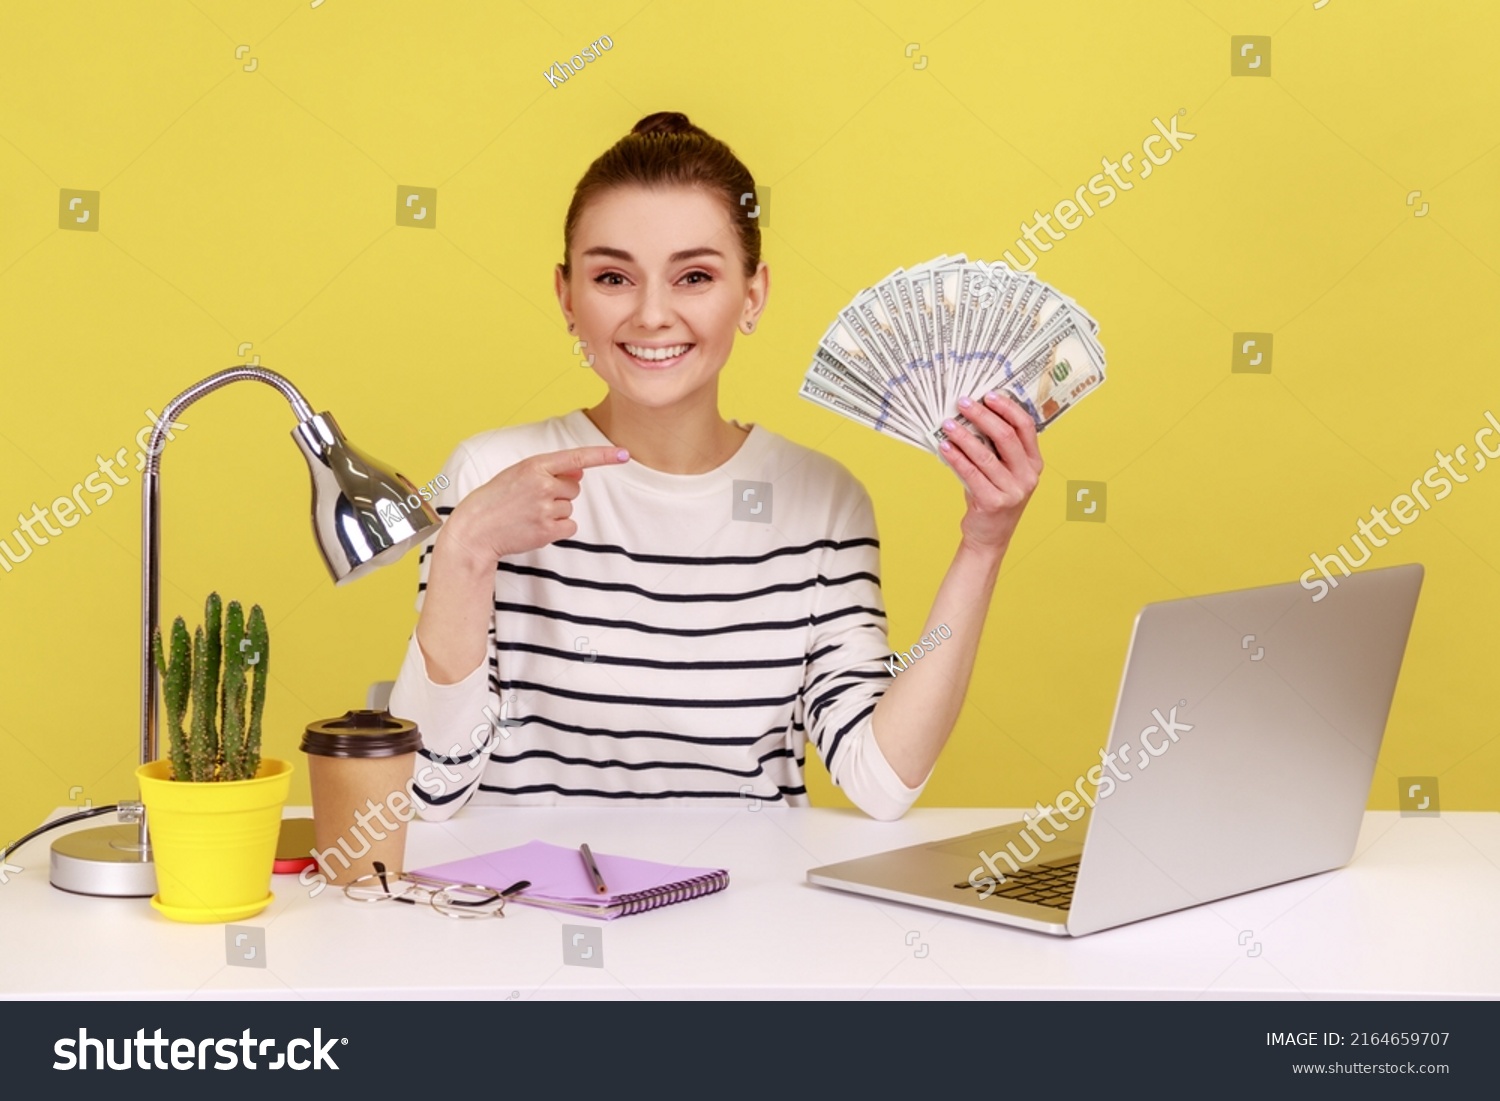 Positive young woman pointing finger at hundred dollar bills, holding sitting at workplace with laptop, high salary, bonuses and perks. Indoor studio studio shot isolated on yellow background. #2164659707